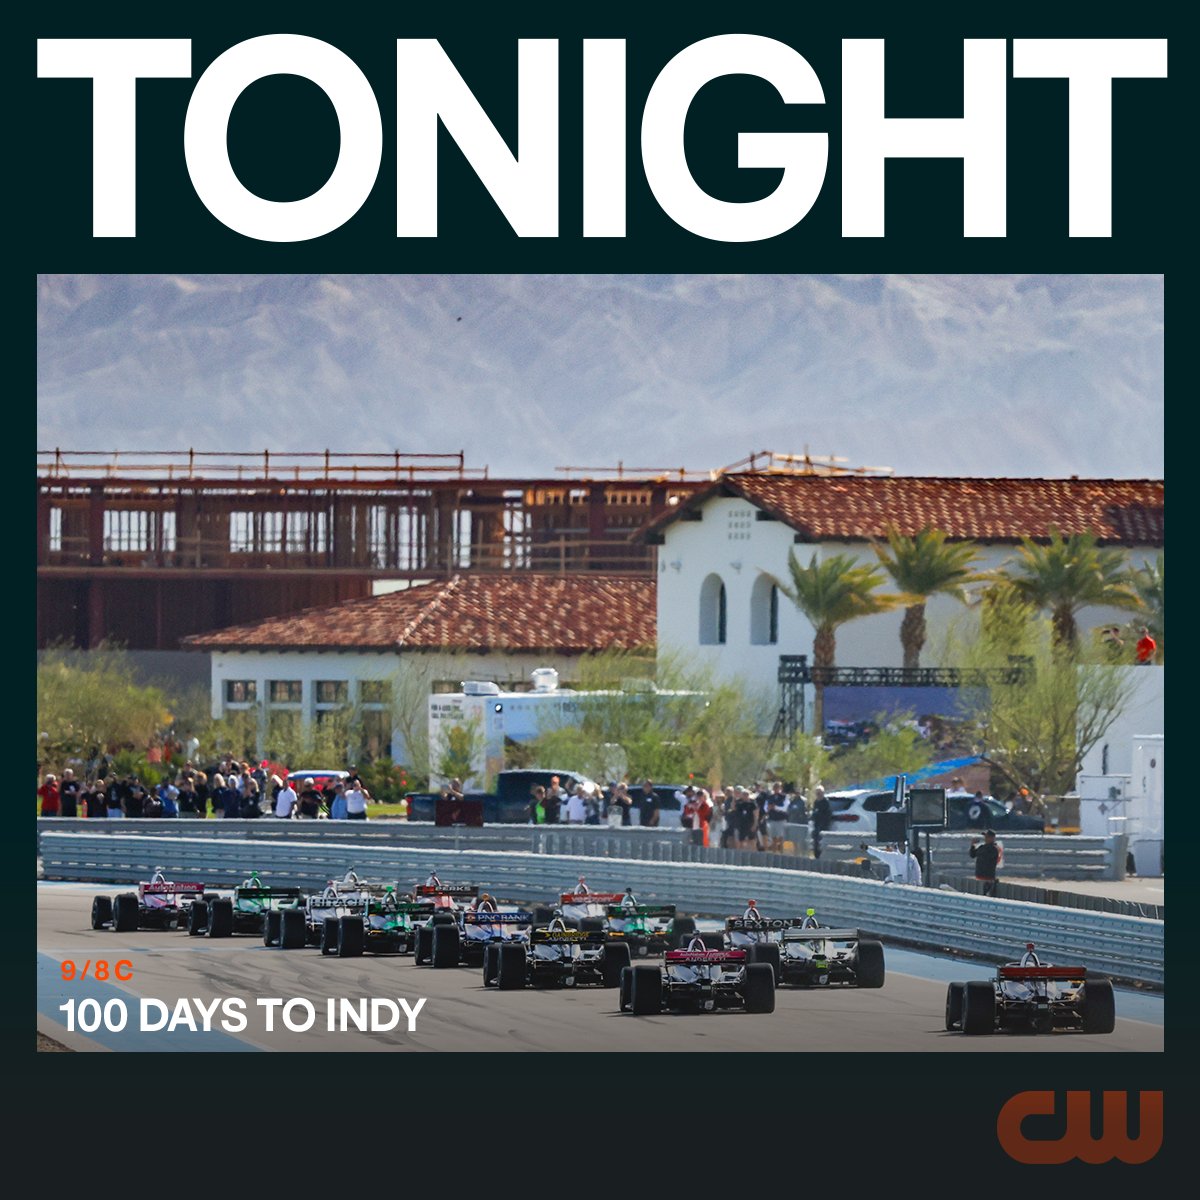 It’s the moment you’ve been waiting for! Episode 2 of #100DaysToIndy airs tonight at 9 PM ET on The CW. Tune in for high-octane drama from beginning to end! Don’t forget to grab your #DetroitGP tickets to experience the thrill of INDYCAR up close: bit.ly/4afqm8G